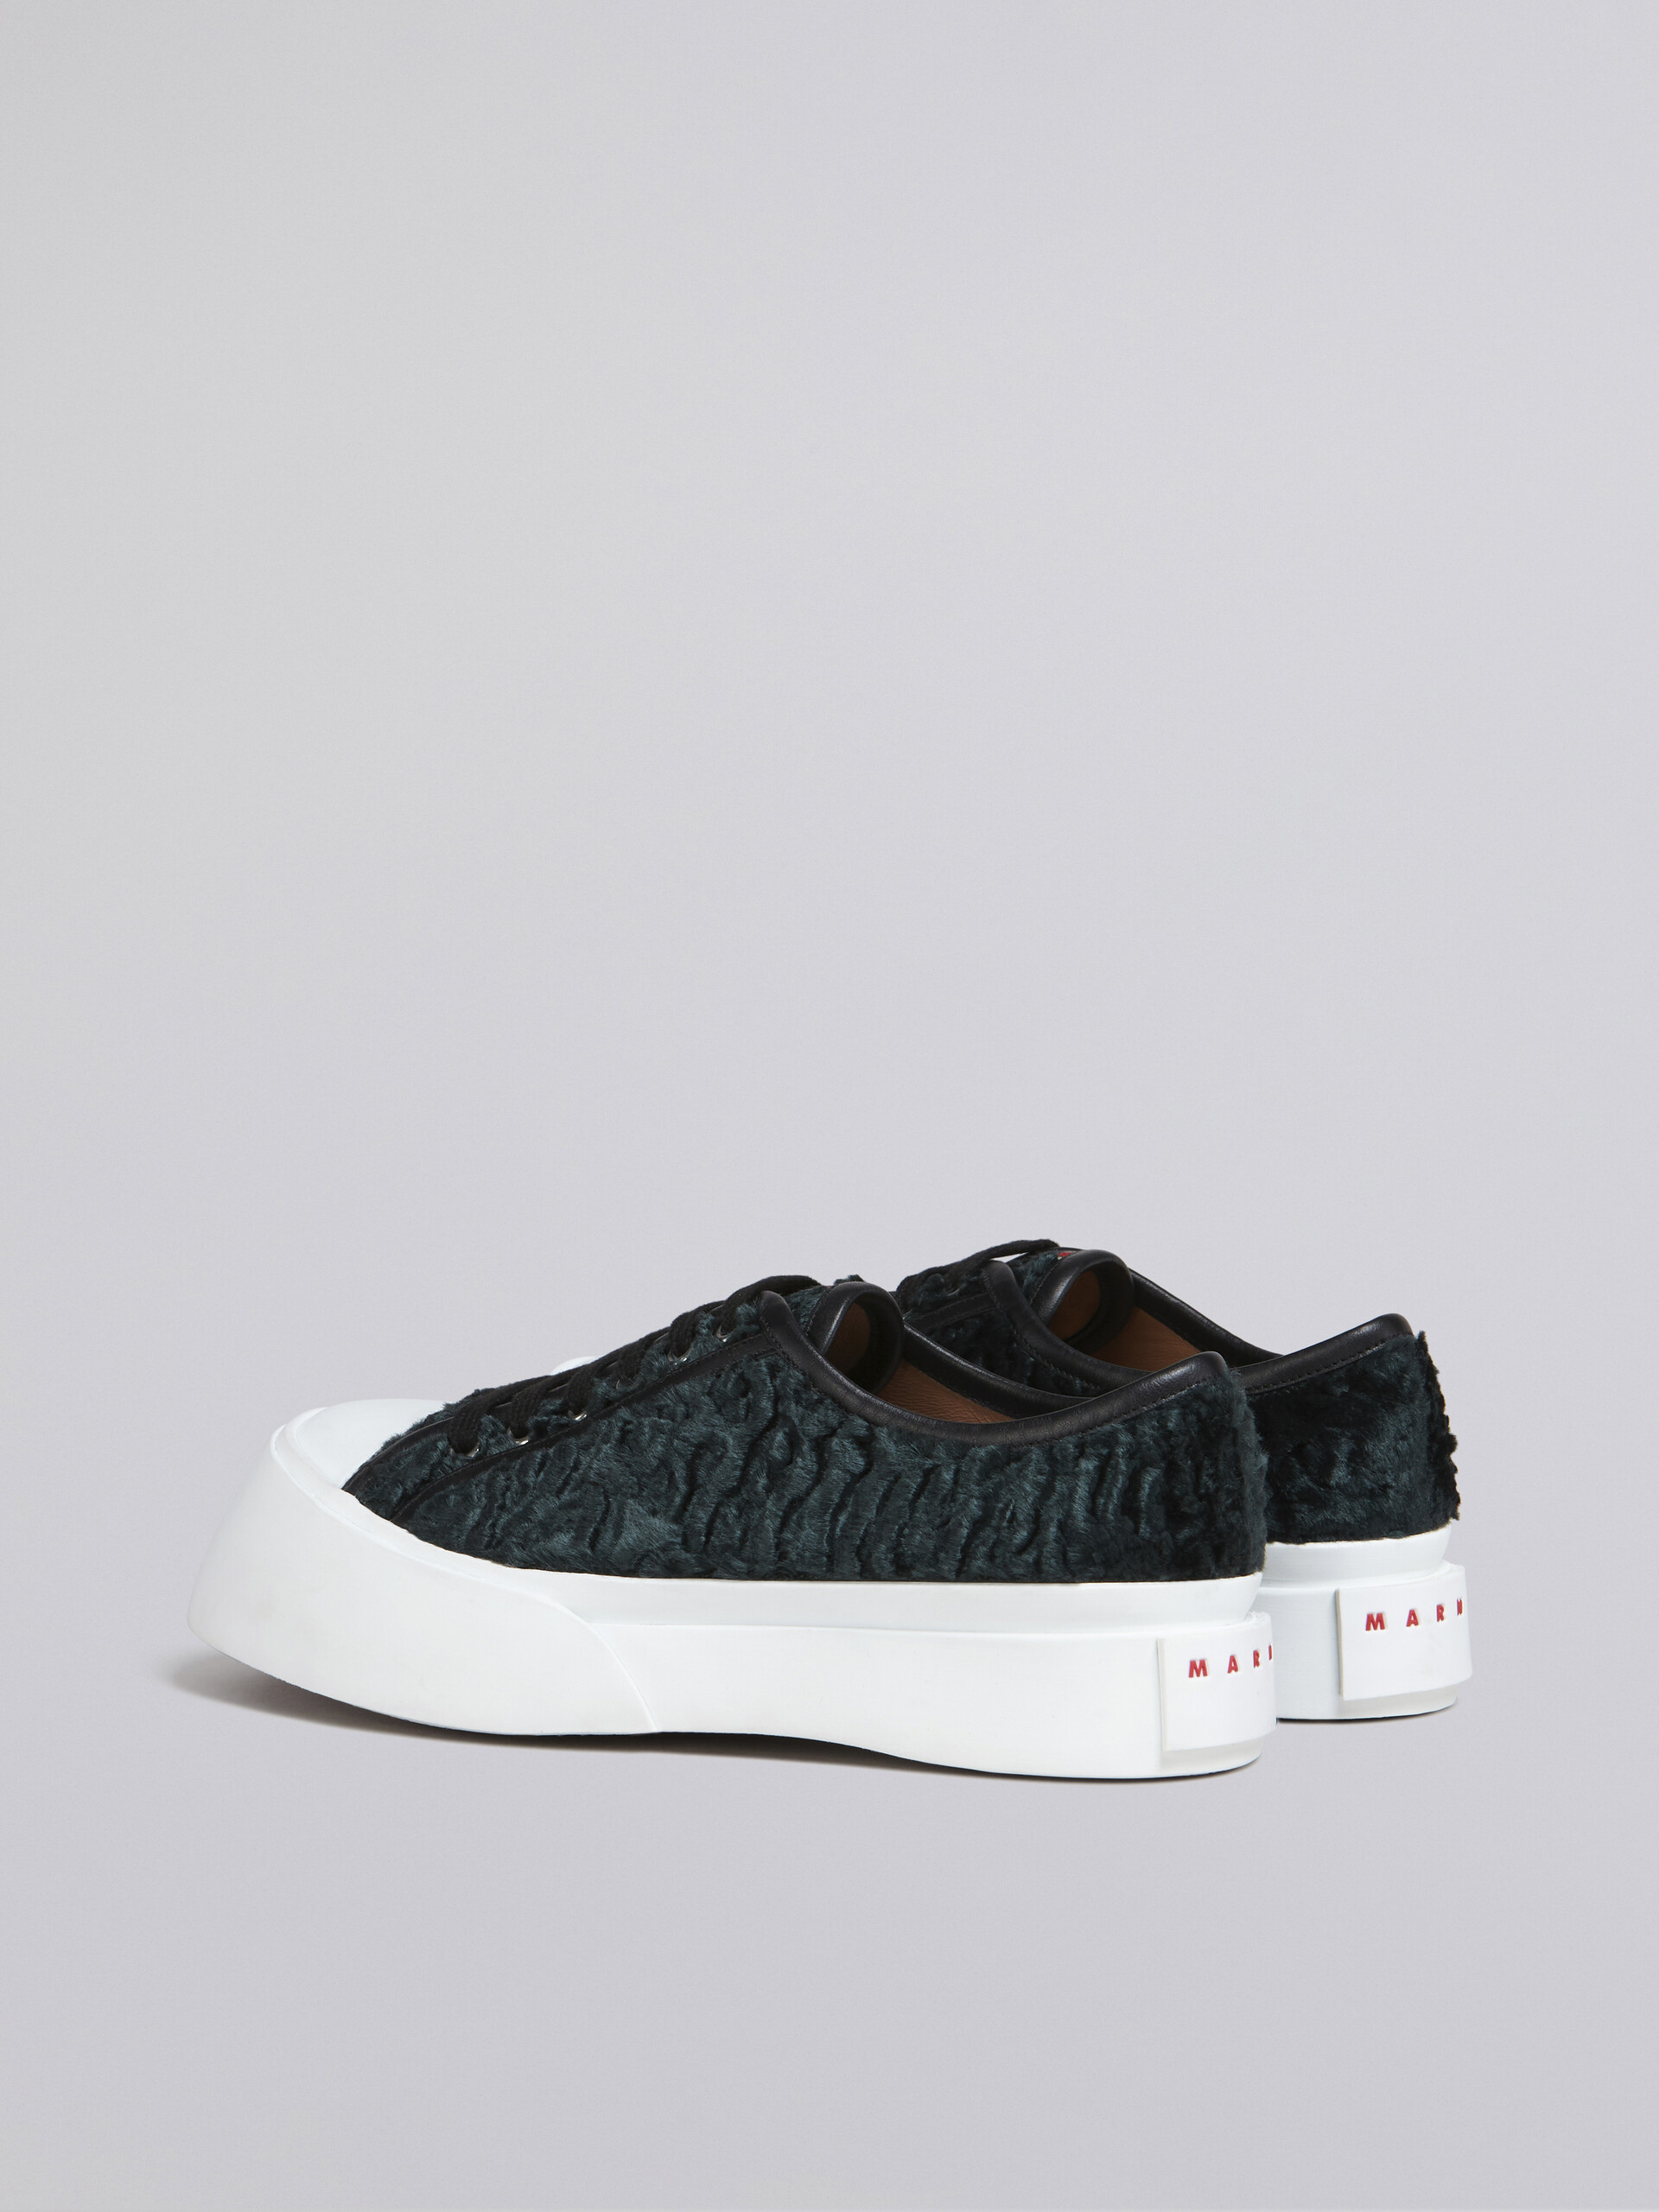 Curly fabric PABLO sneaker - Sneakers - Image 3